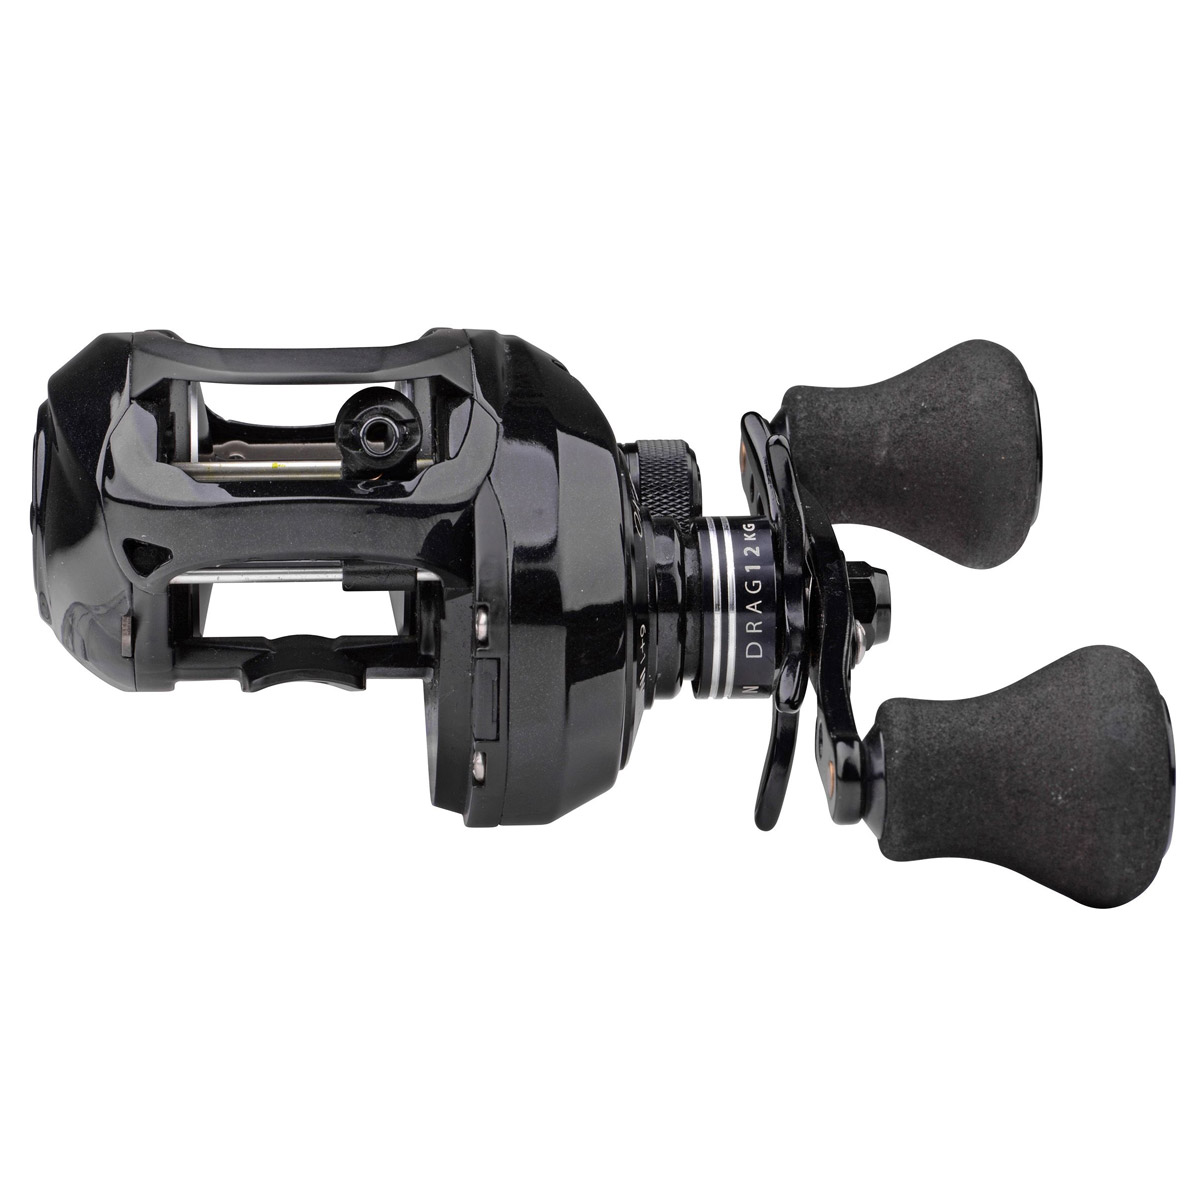 Spro OX Bc Reel